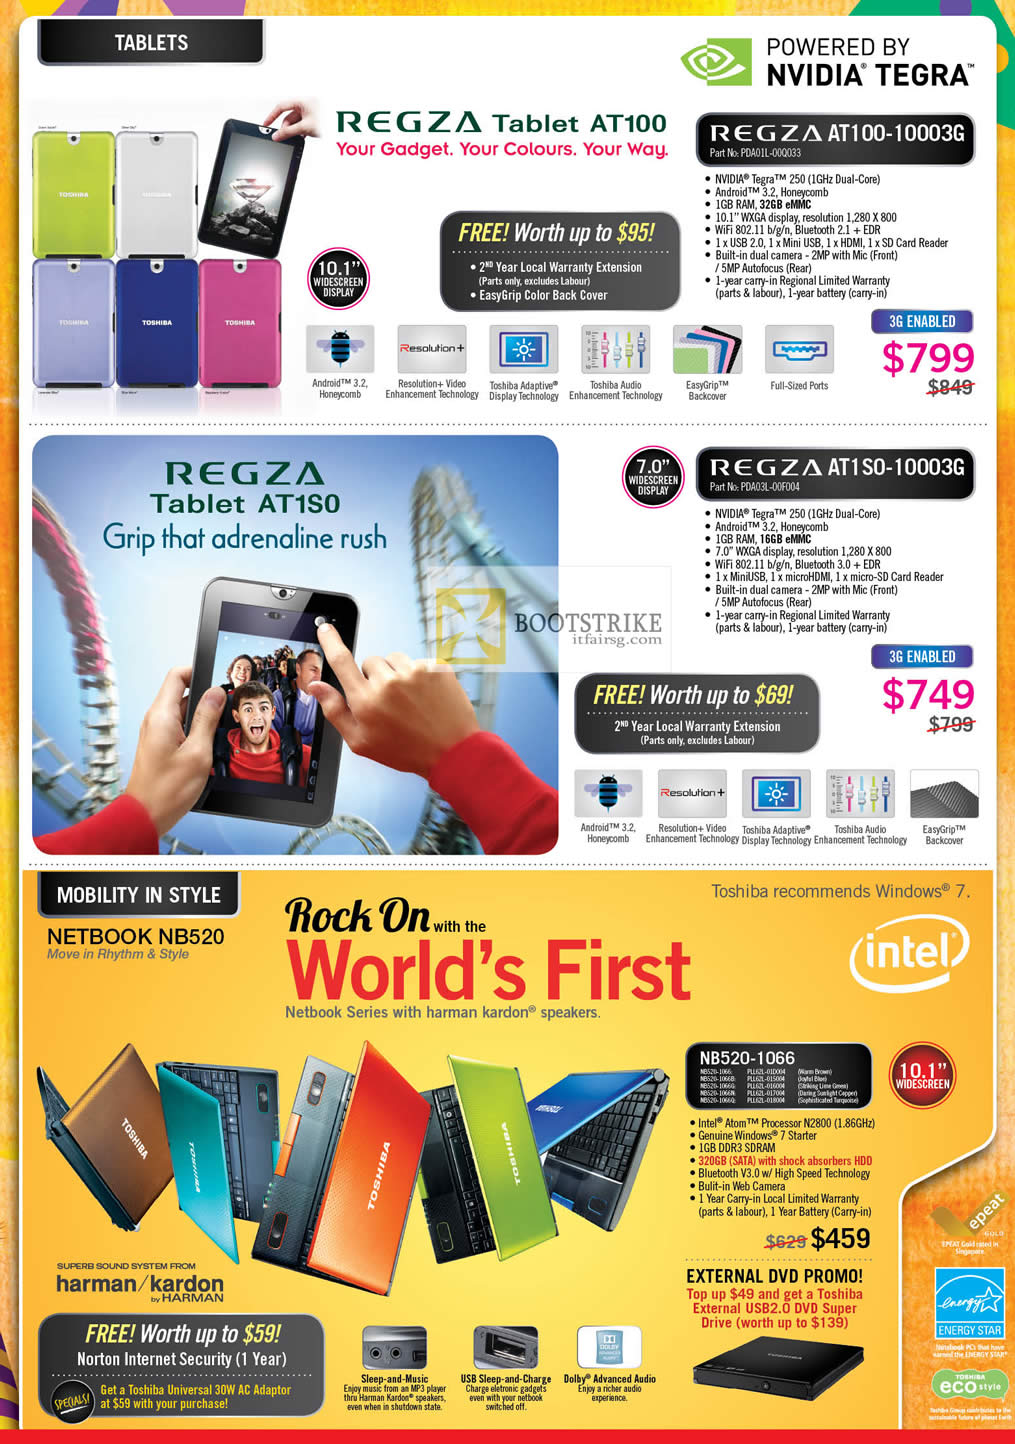 PC SHOW 2012 price list image brochure of Toshiba Tablets Regza AT100-10003G, AT1SO-10003G, Netbook NB520-1066